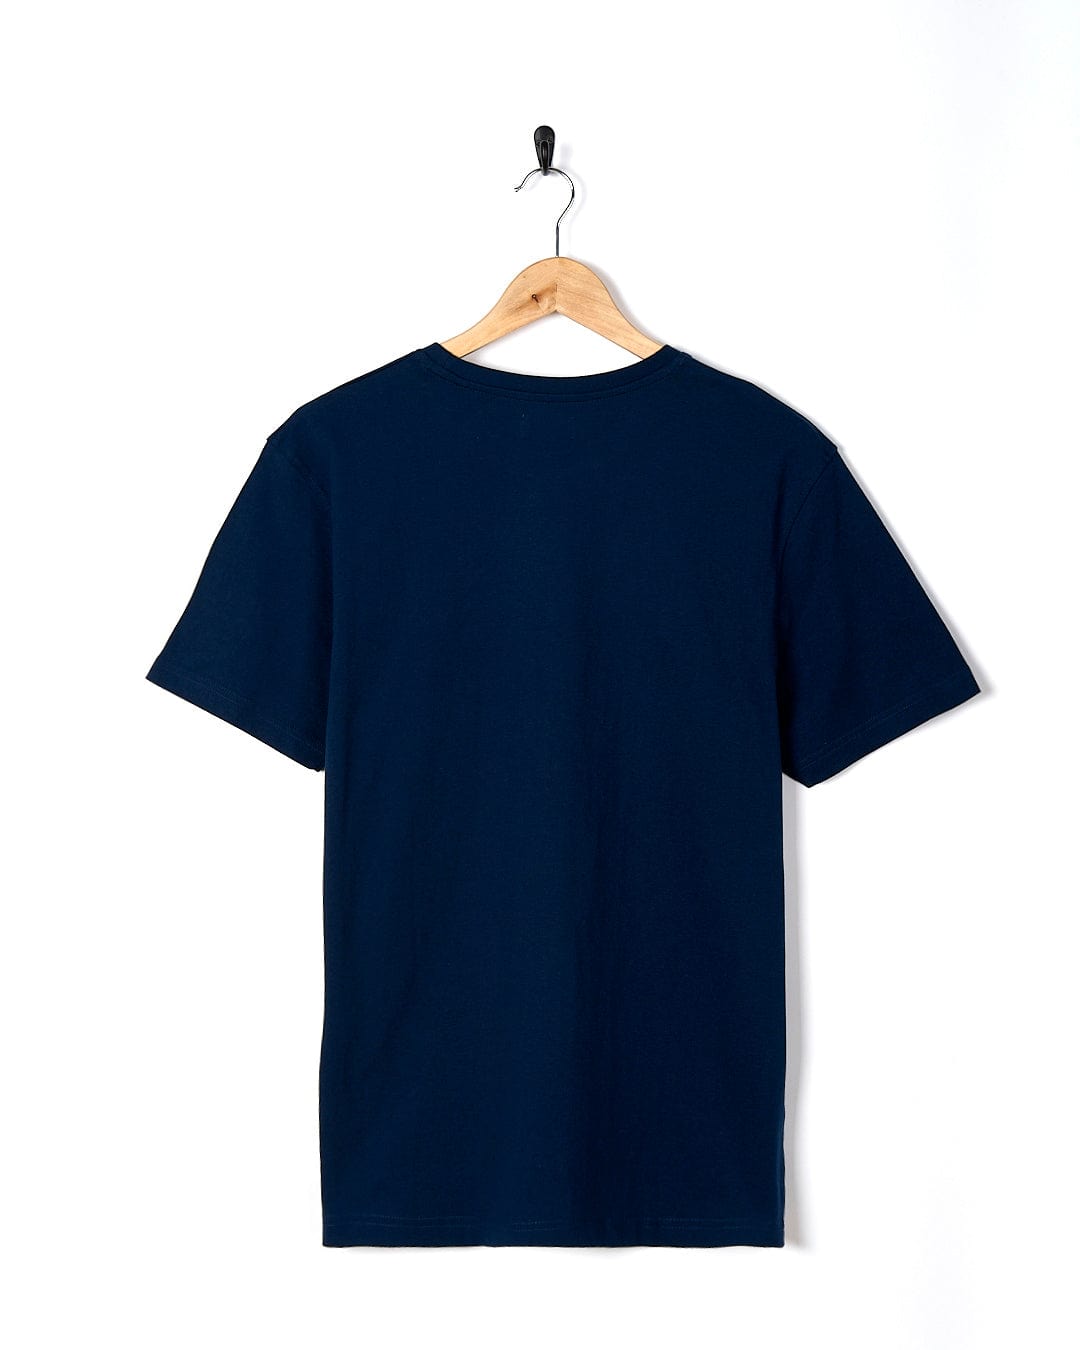 The back of a Saltrock Live Life Location - Mens Short Sleeve T-Shirt - Blue hanging on a hanger.